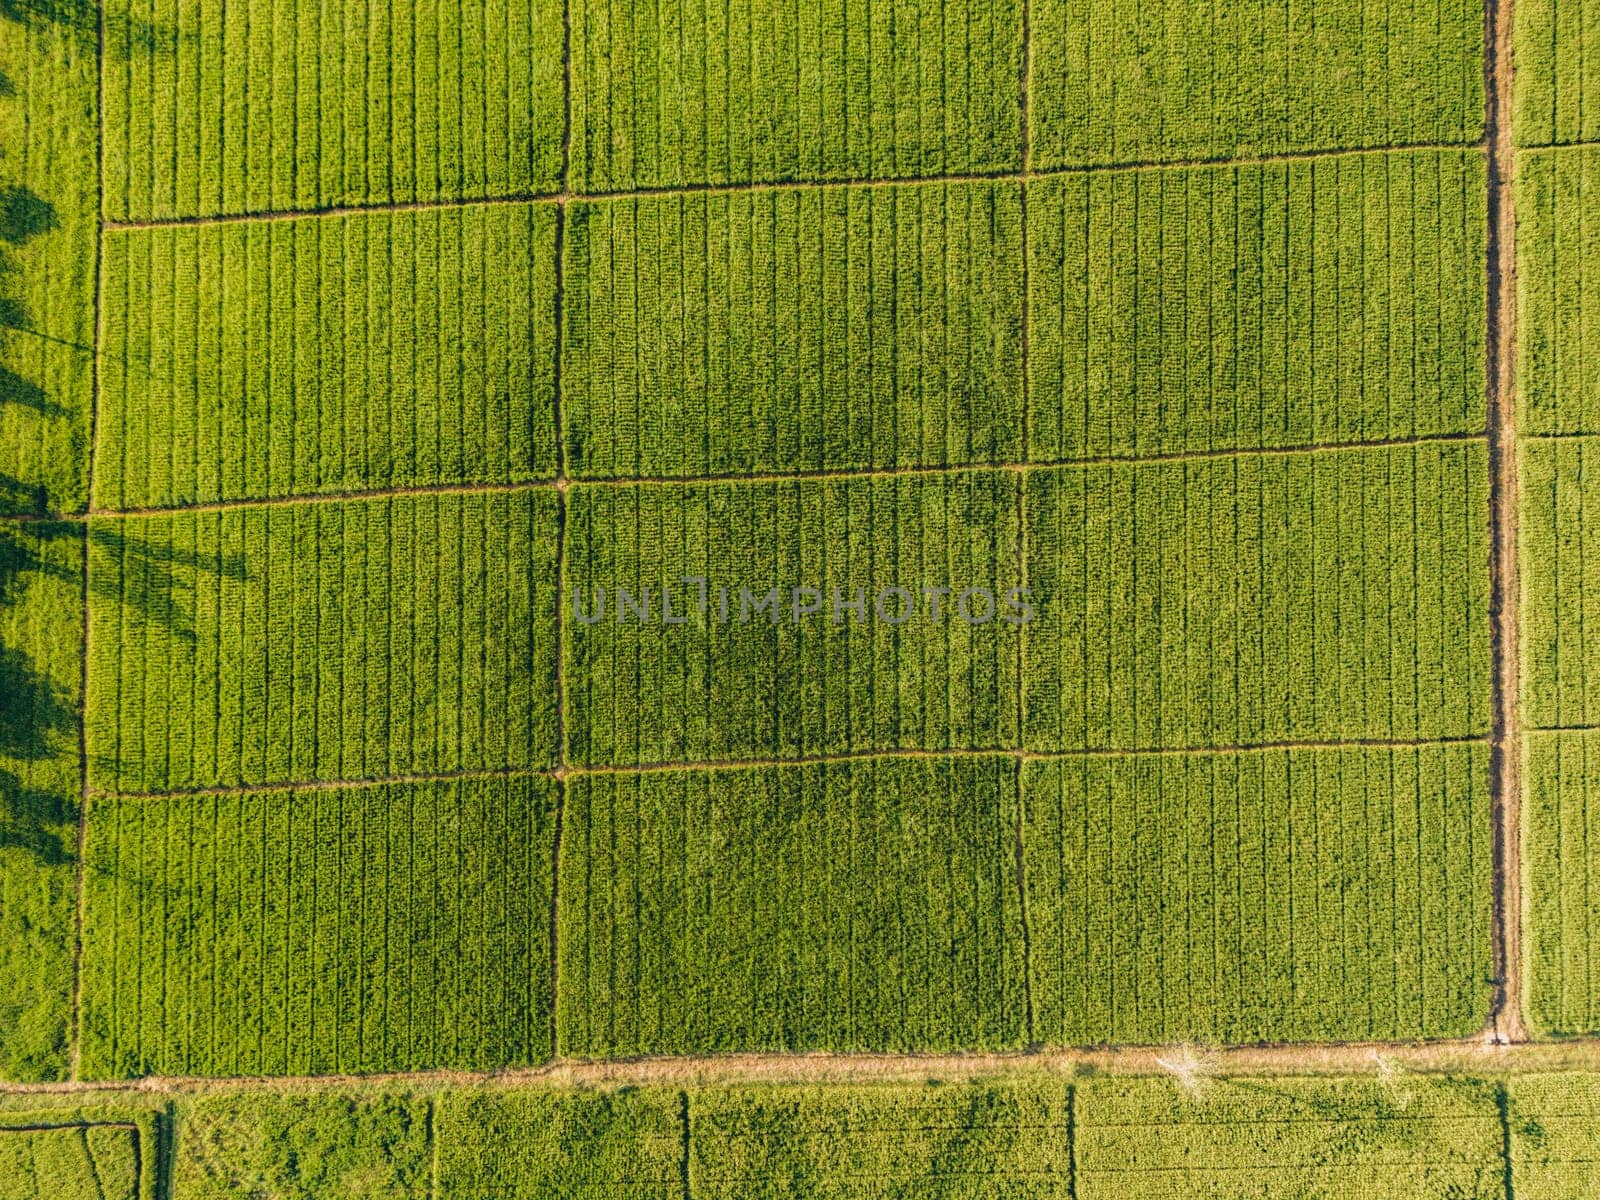 Top view of a green agriculture field with tall grass and rows of plants